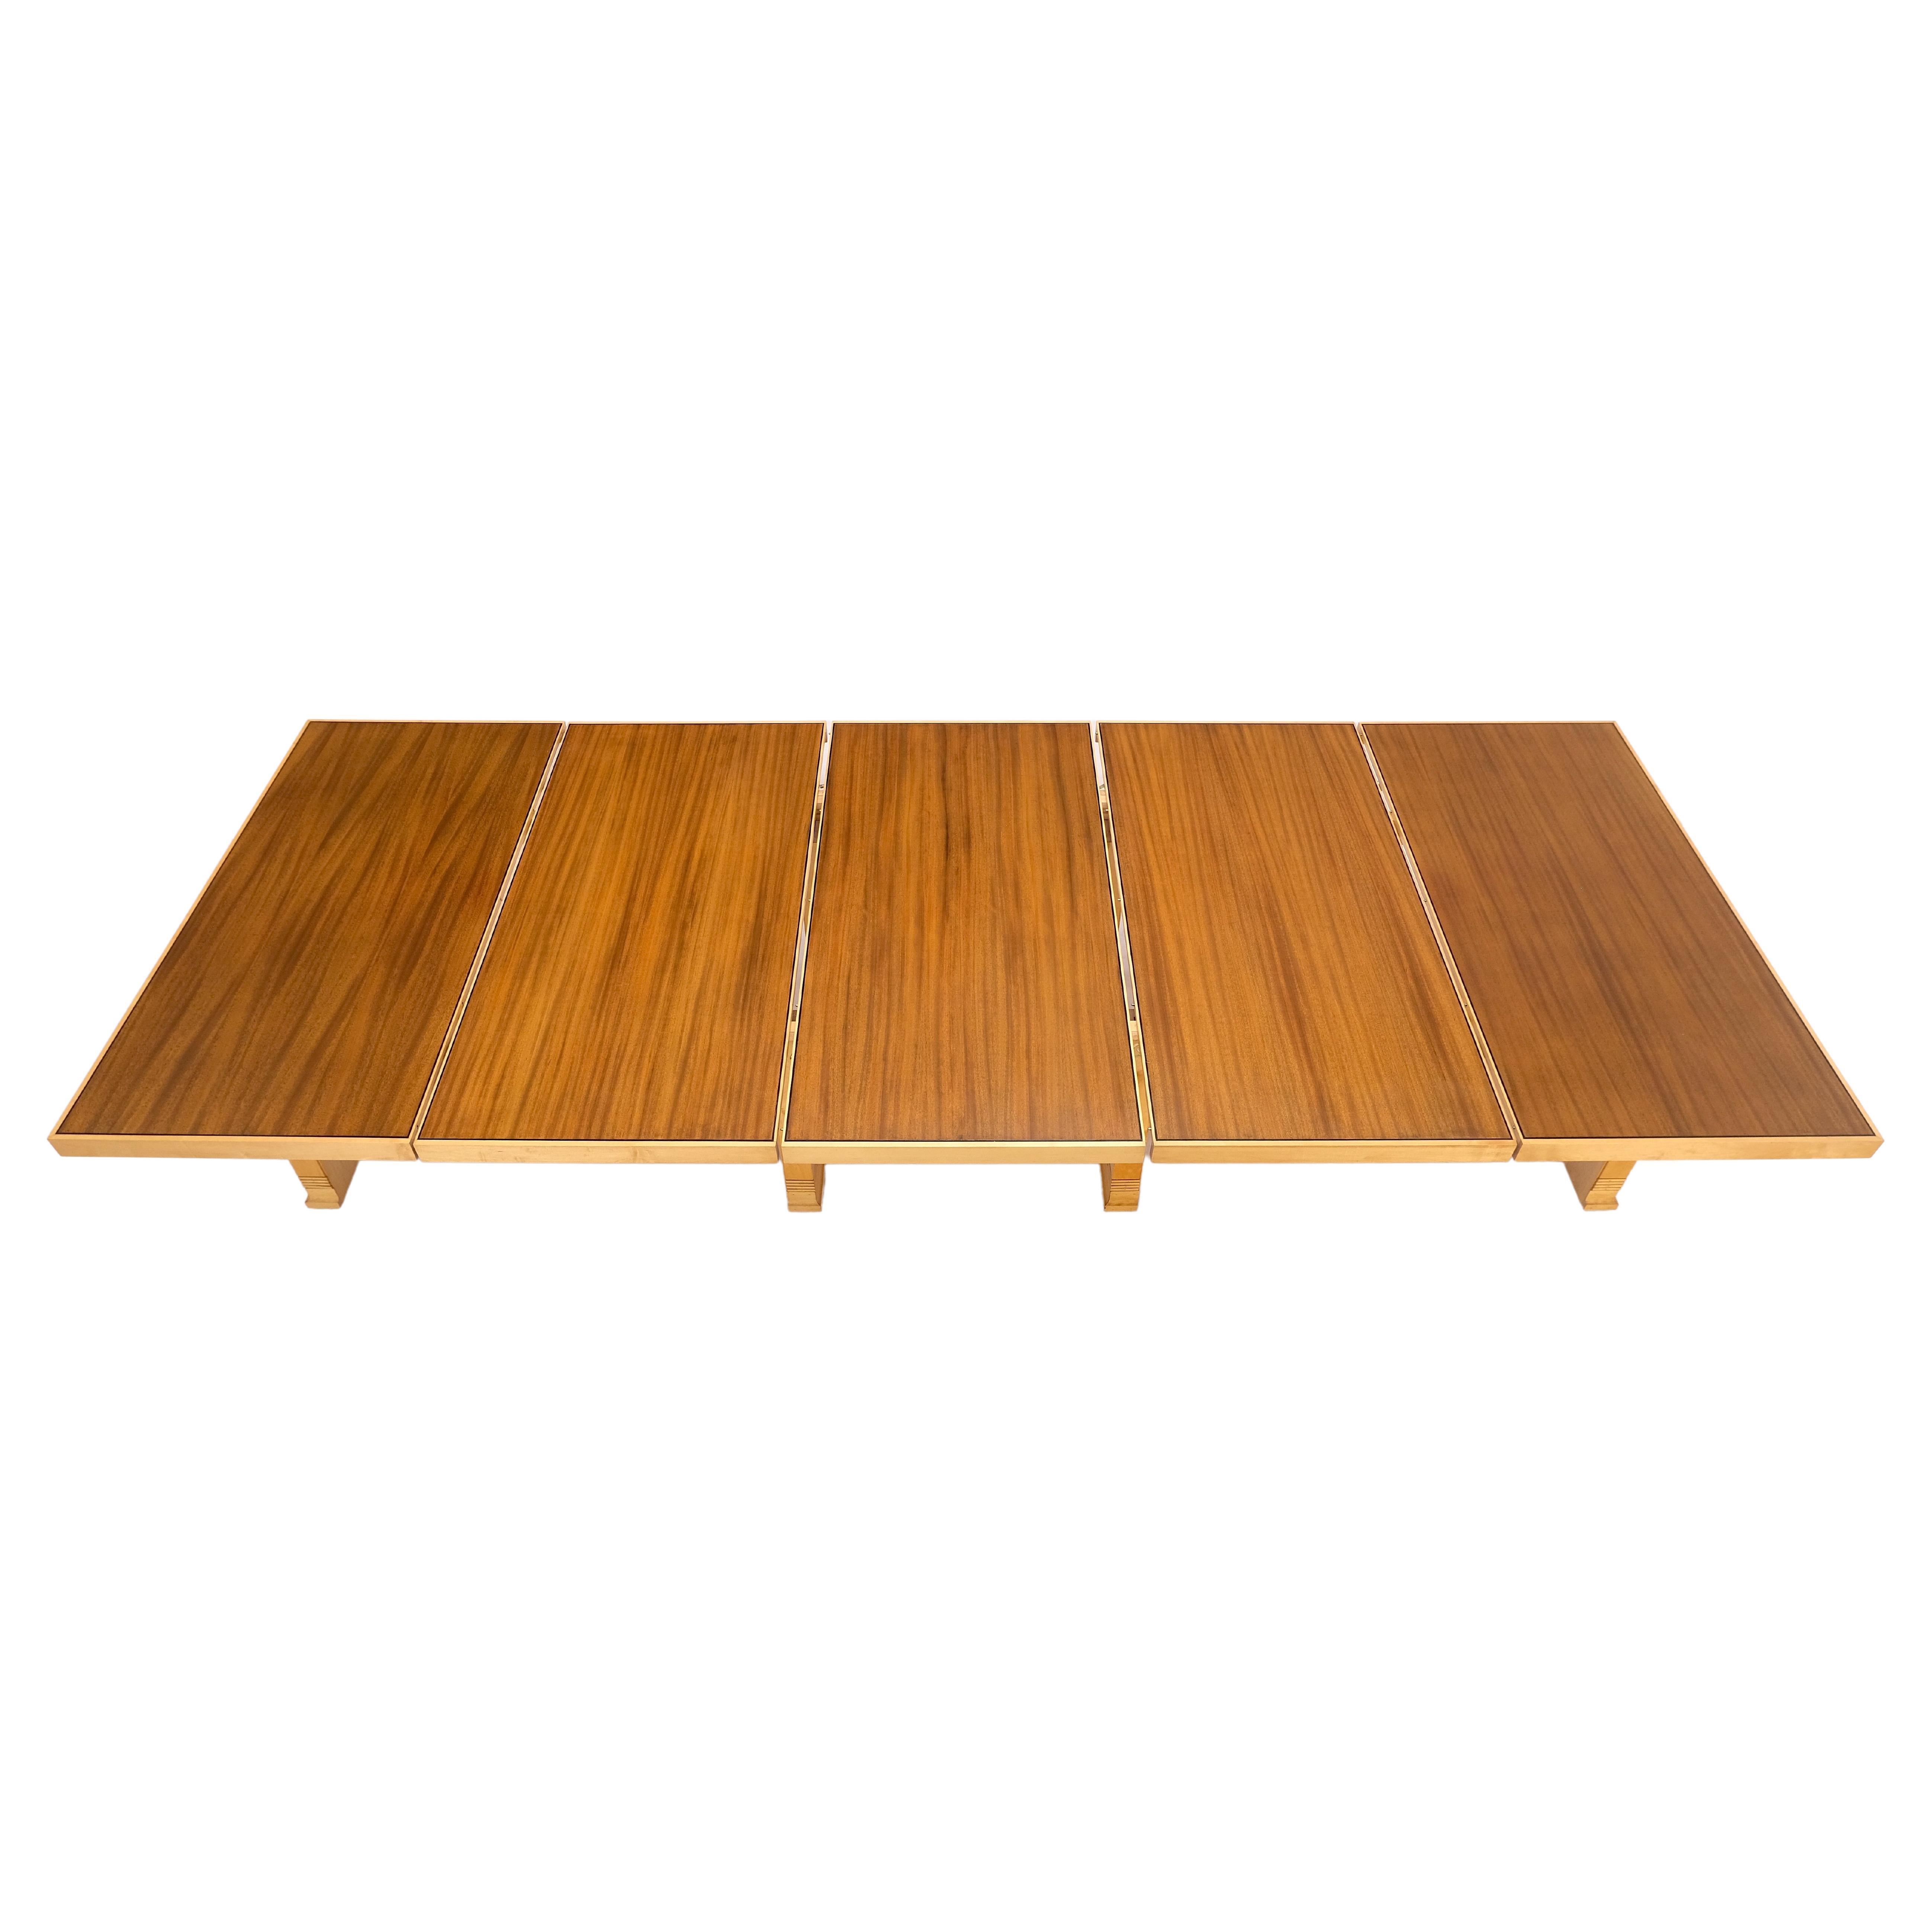 Very Large Custom Studio Built 12.5' Long 3 Leaves Square Gate Leg Dining Conference Table. 
Three leaves, each measuring 30 inches across total length with leaves: 150 inches long.